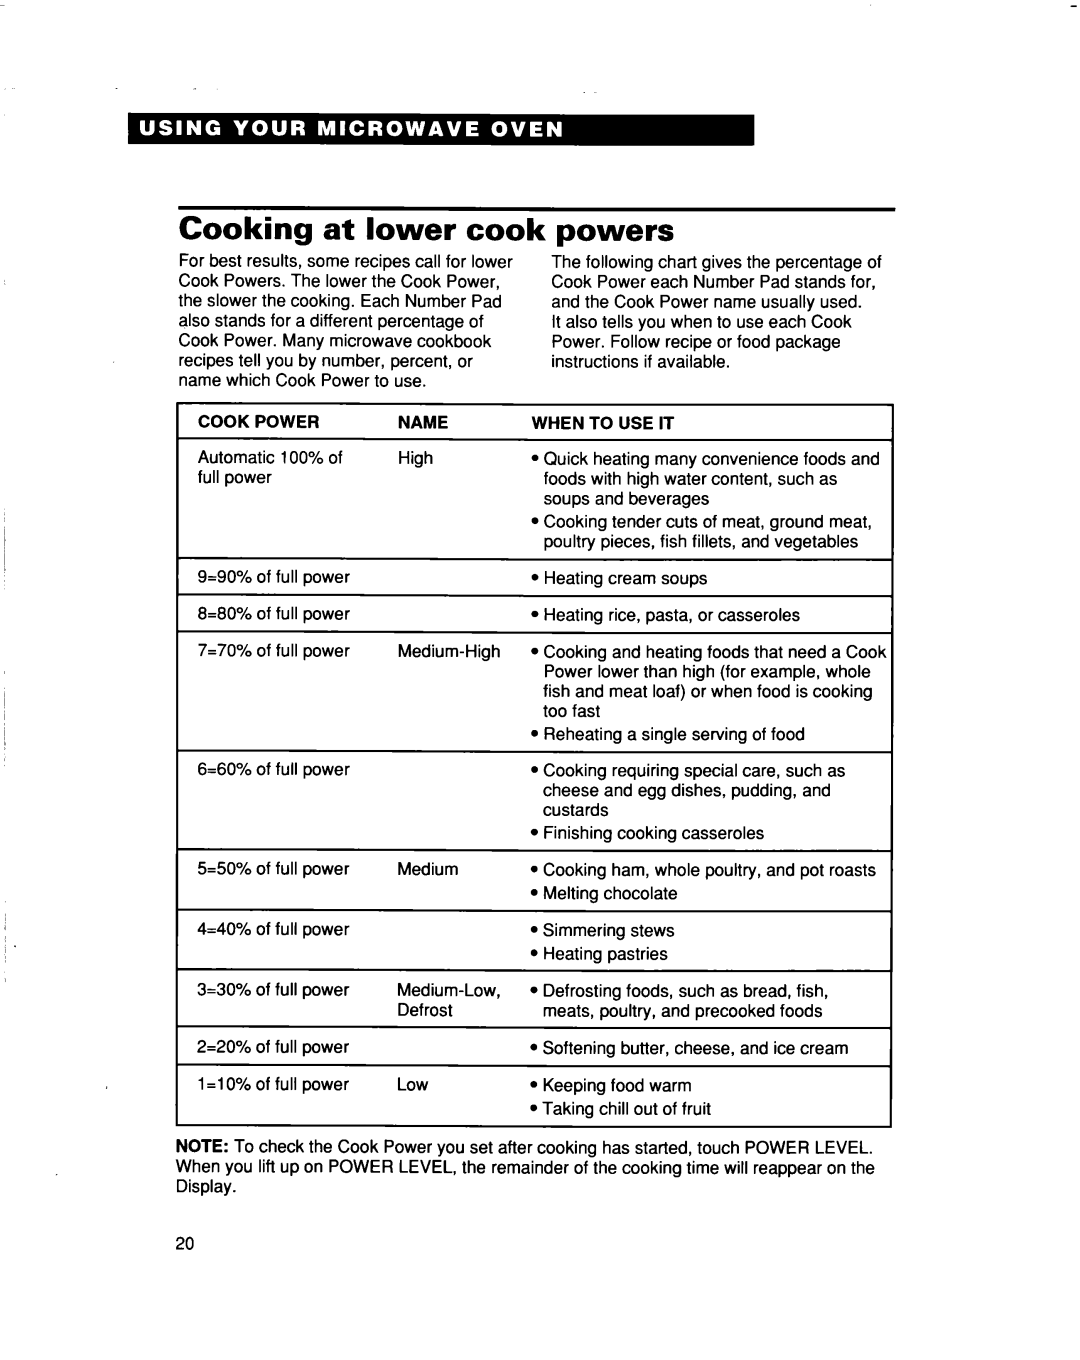 Whirlpool MT5120XAQ installation instructions Cooking at lower cook, powers, Cook Power, Name 